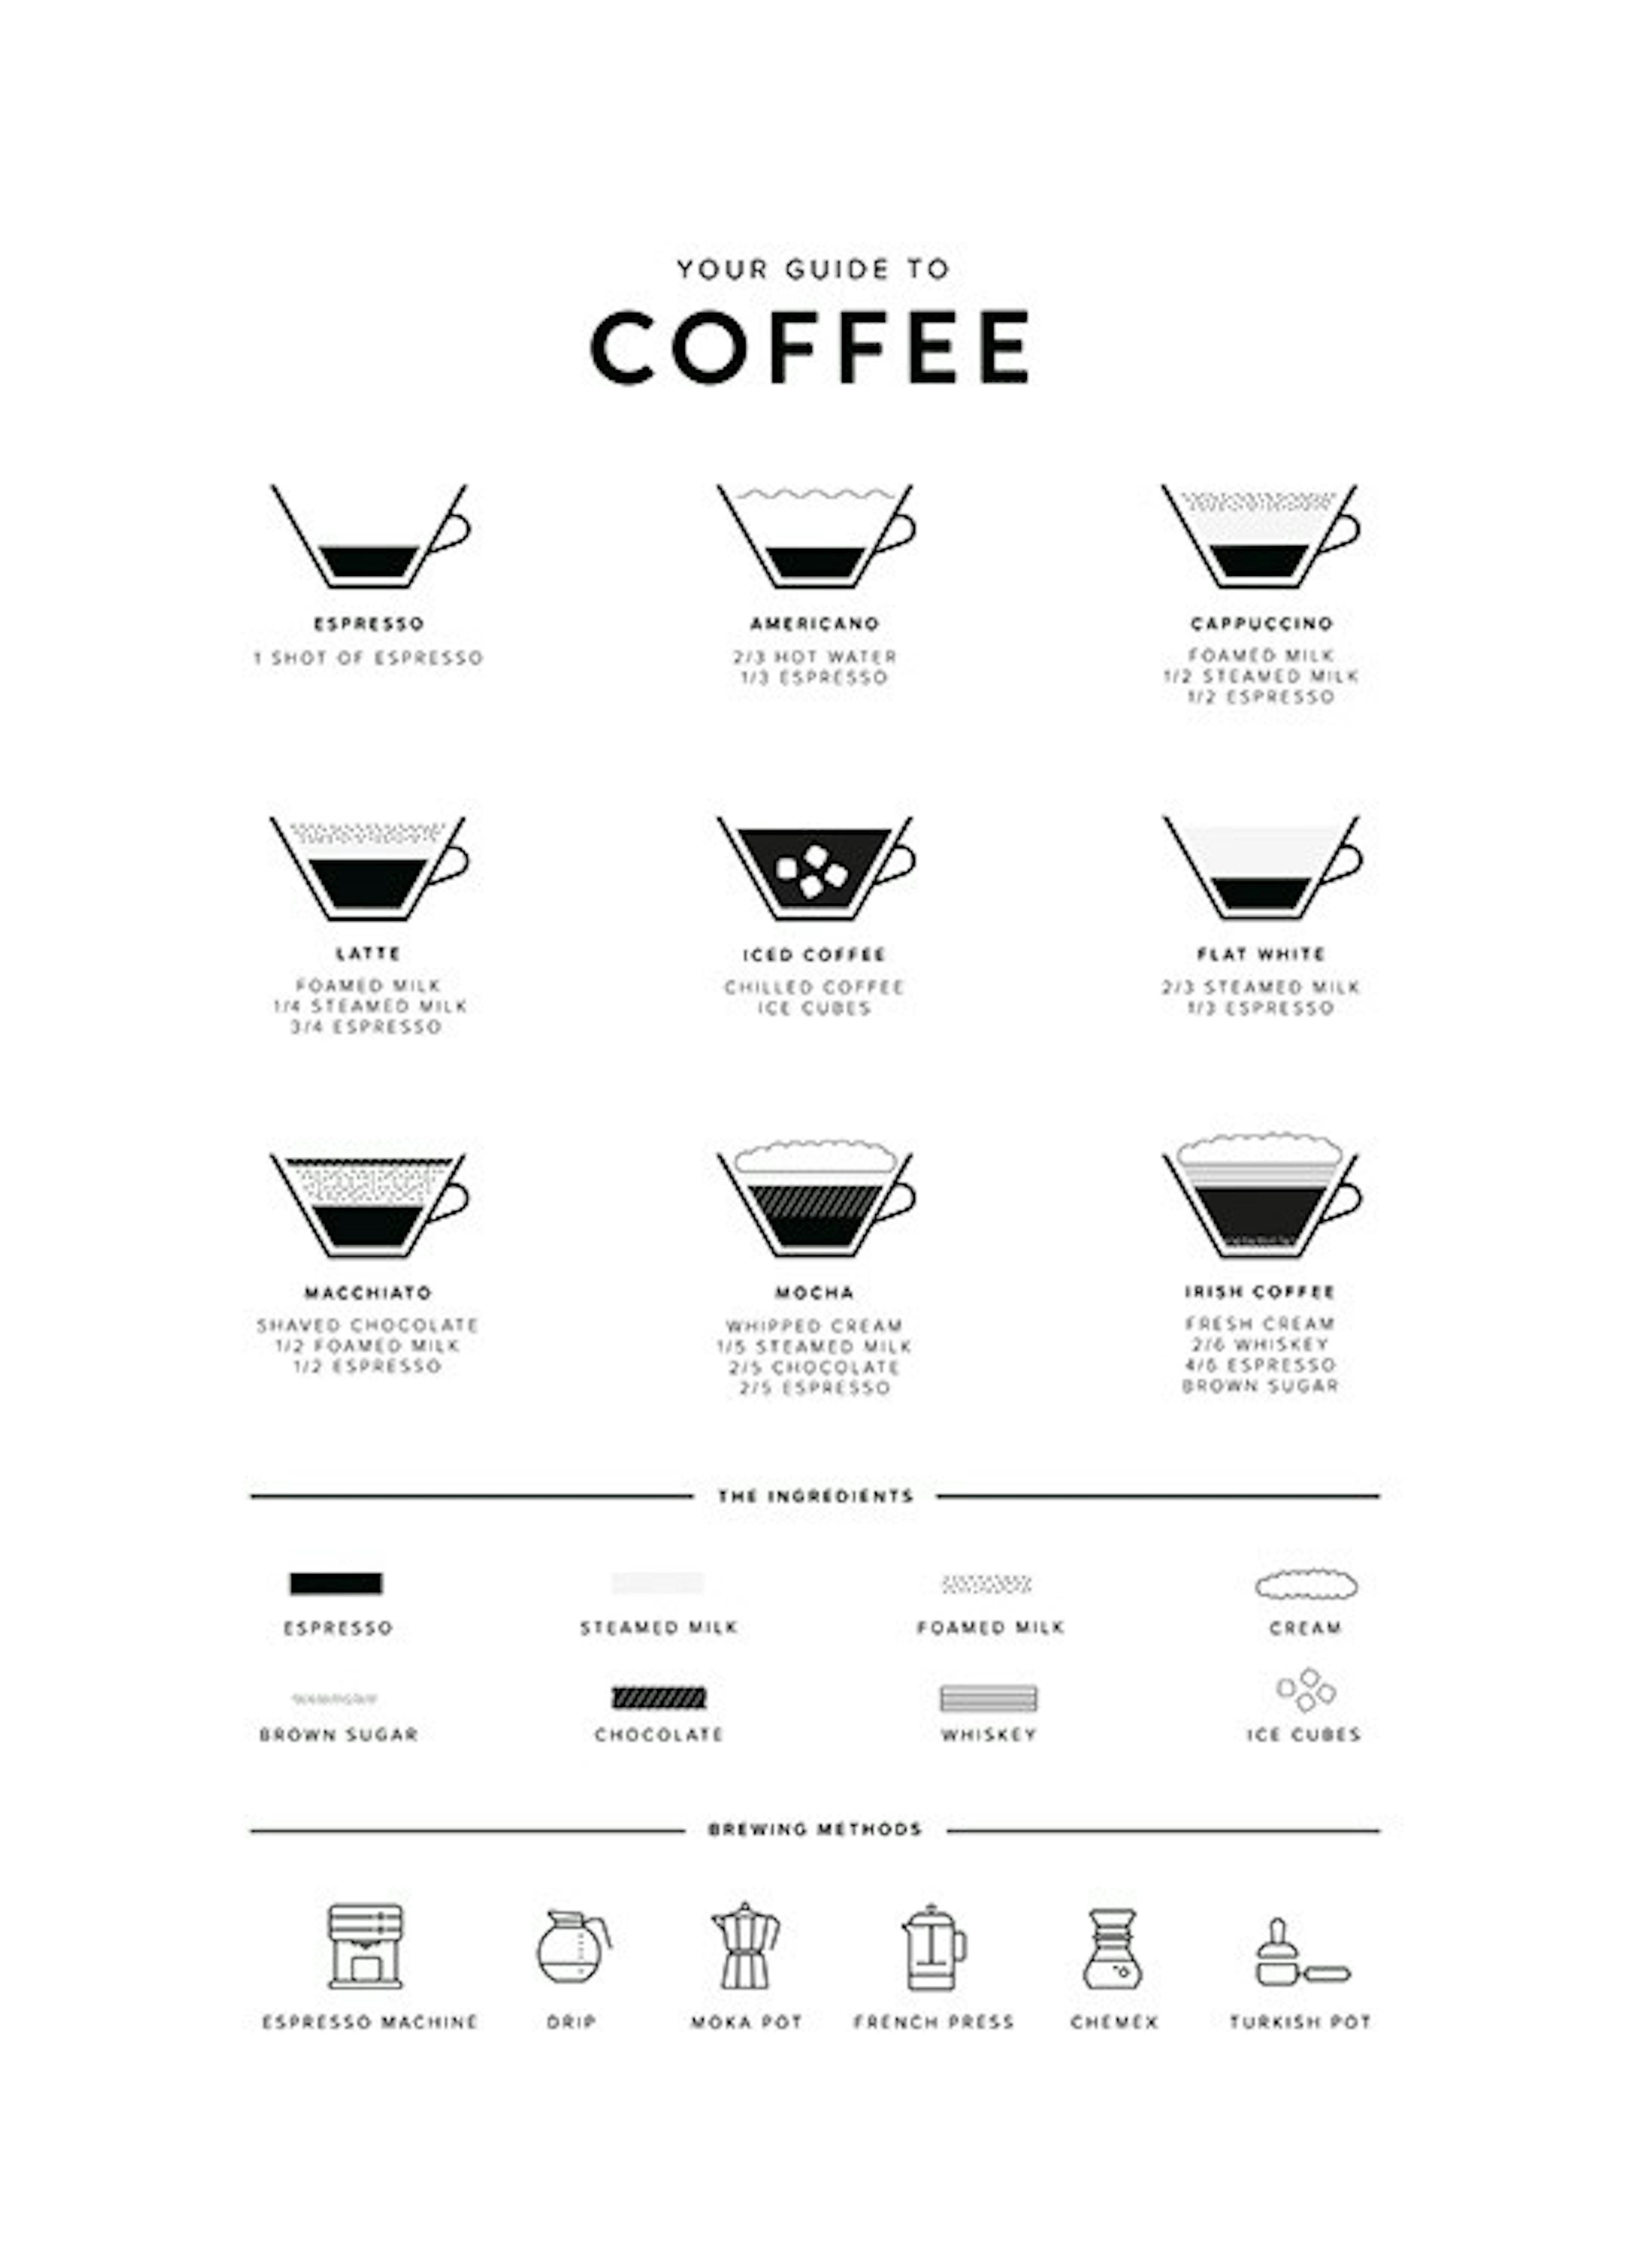 Your Guide to Coffee Print